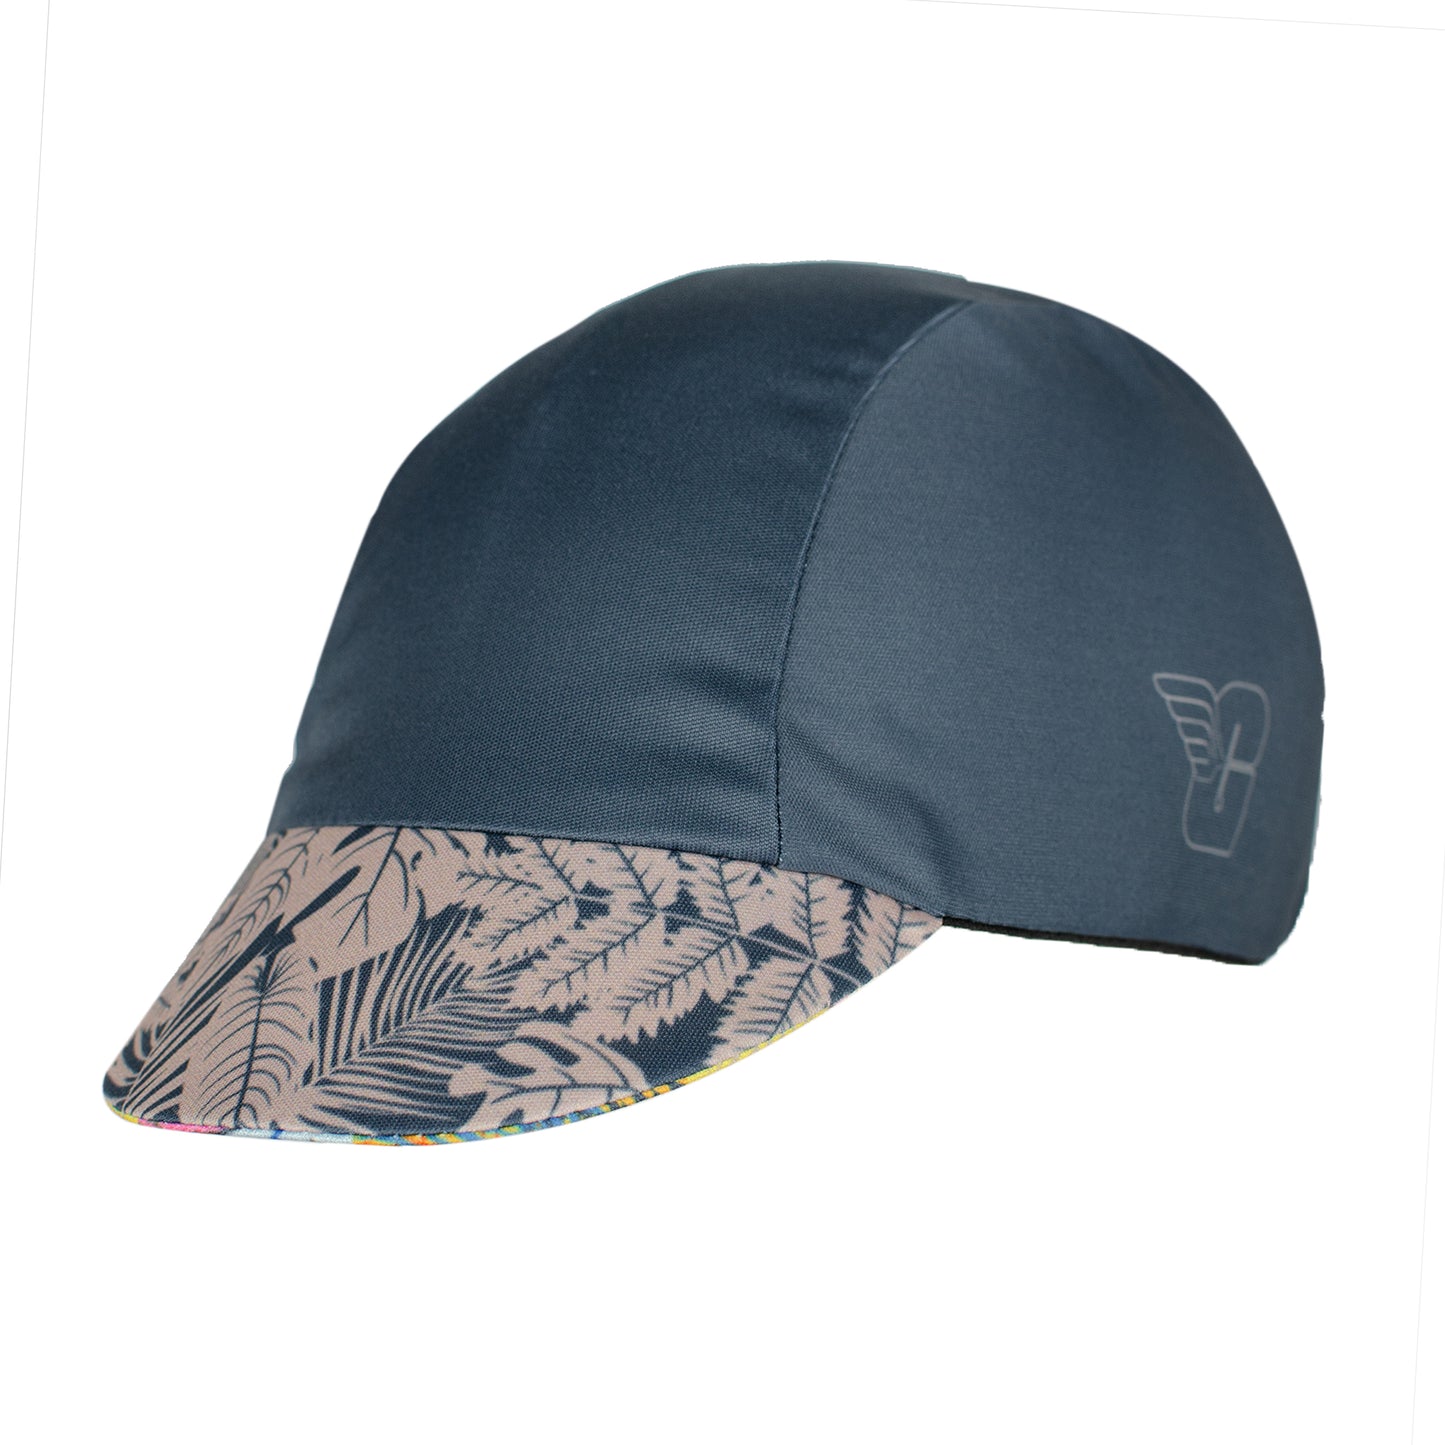 GW Abstract Foliage Cycling cap (Spruce)